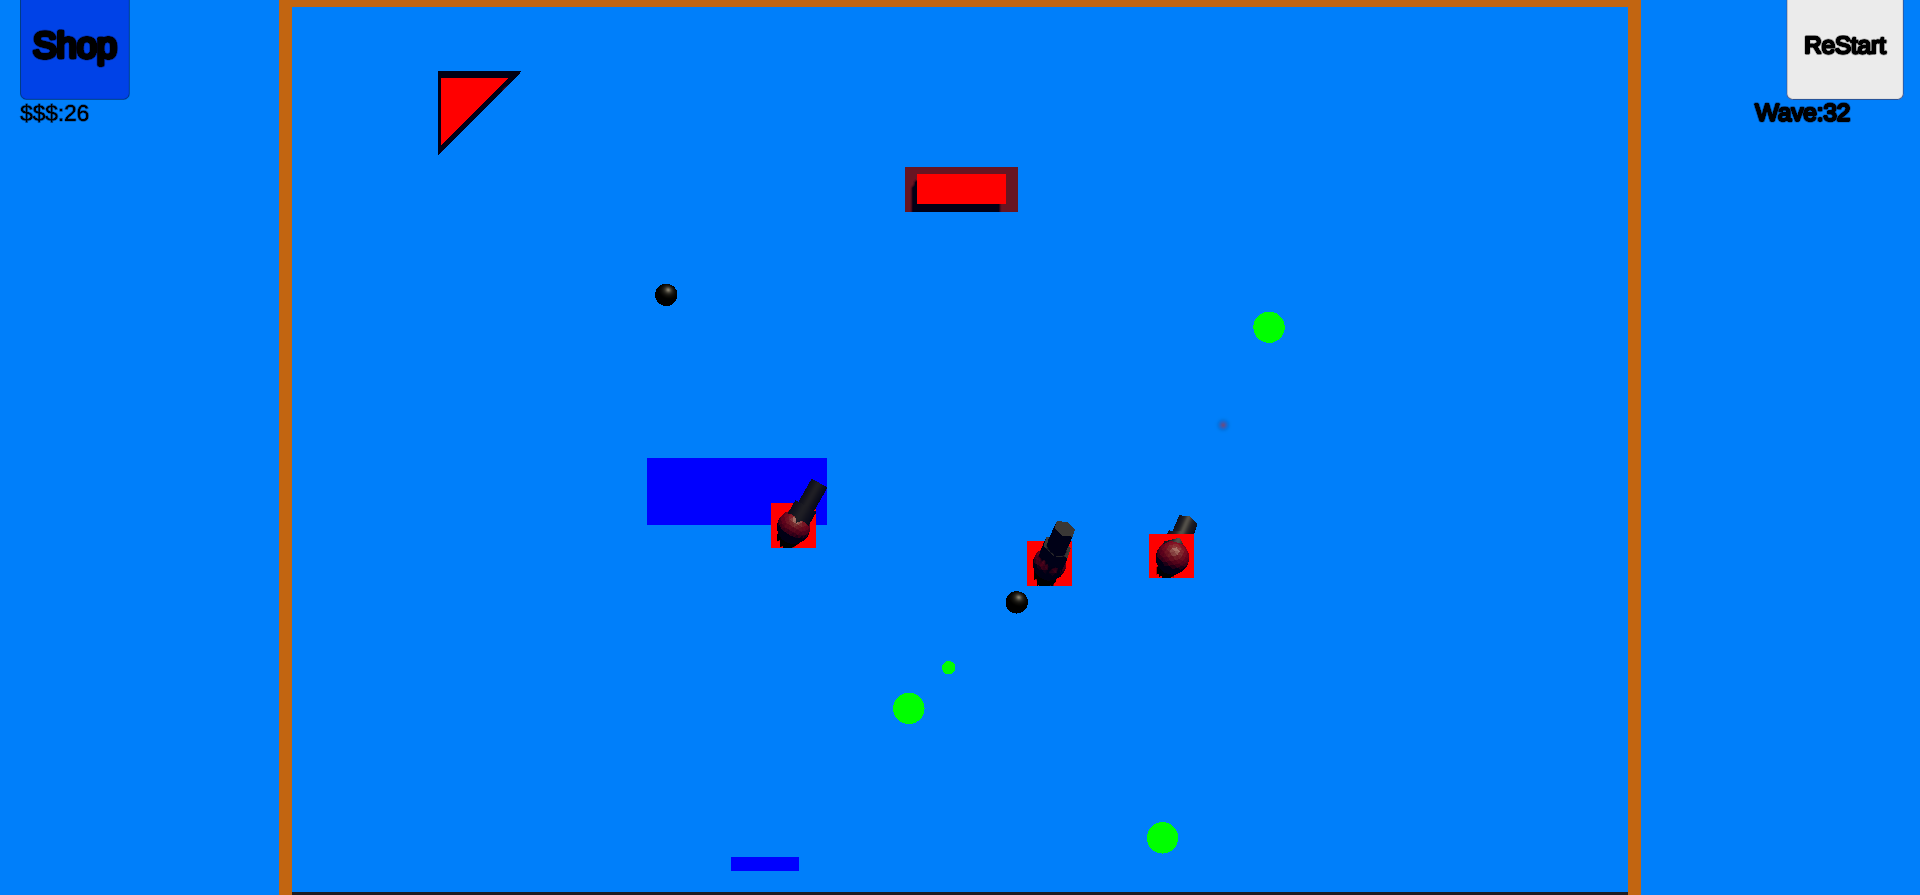 HypperBall (A Brick Breaker Tycoon Game)